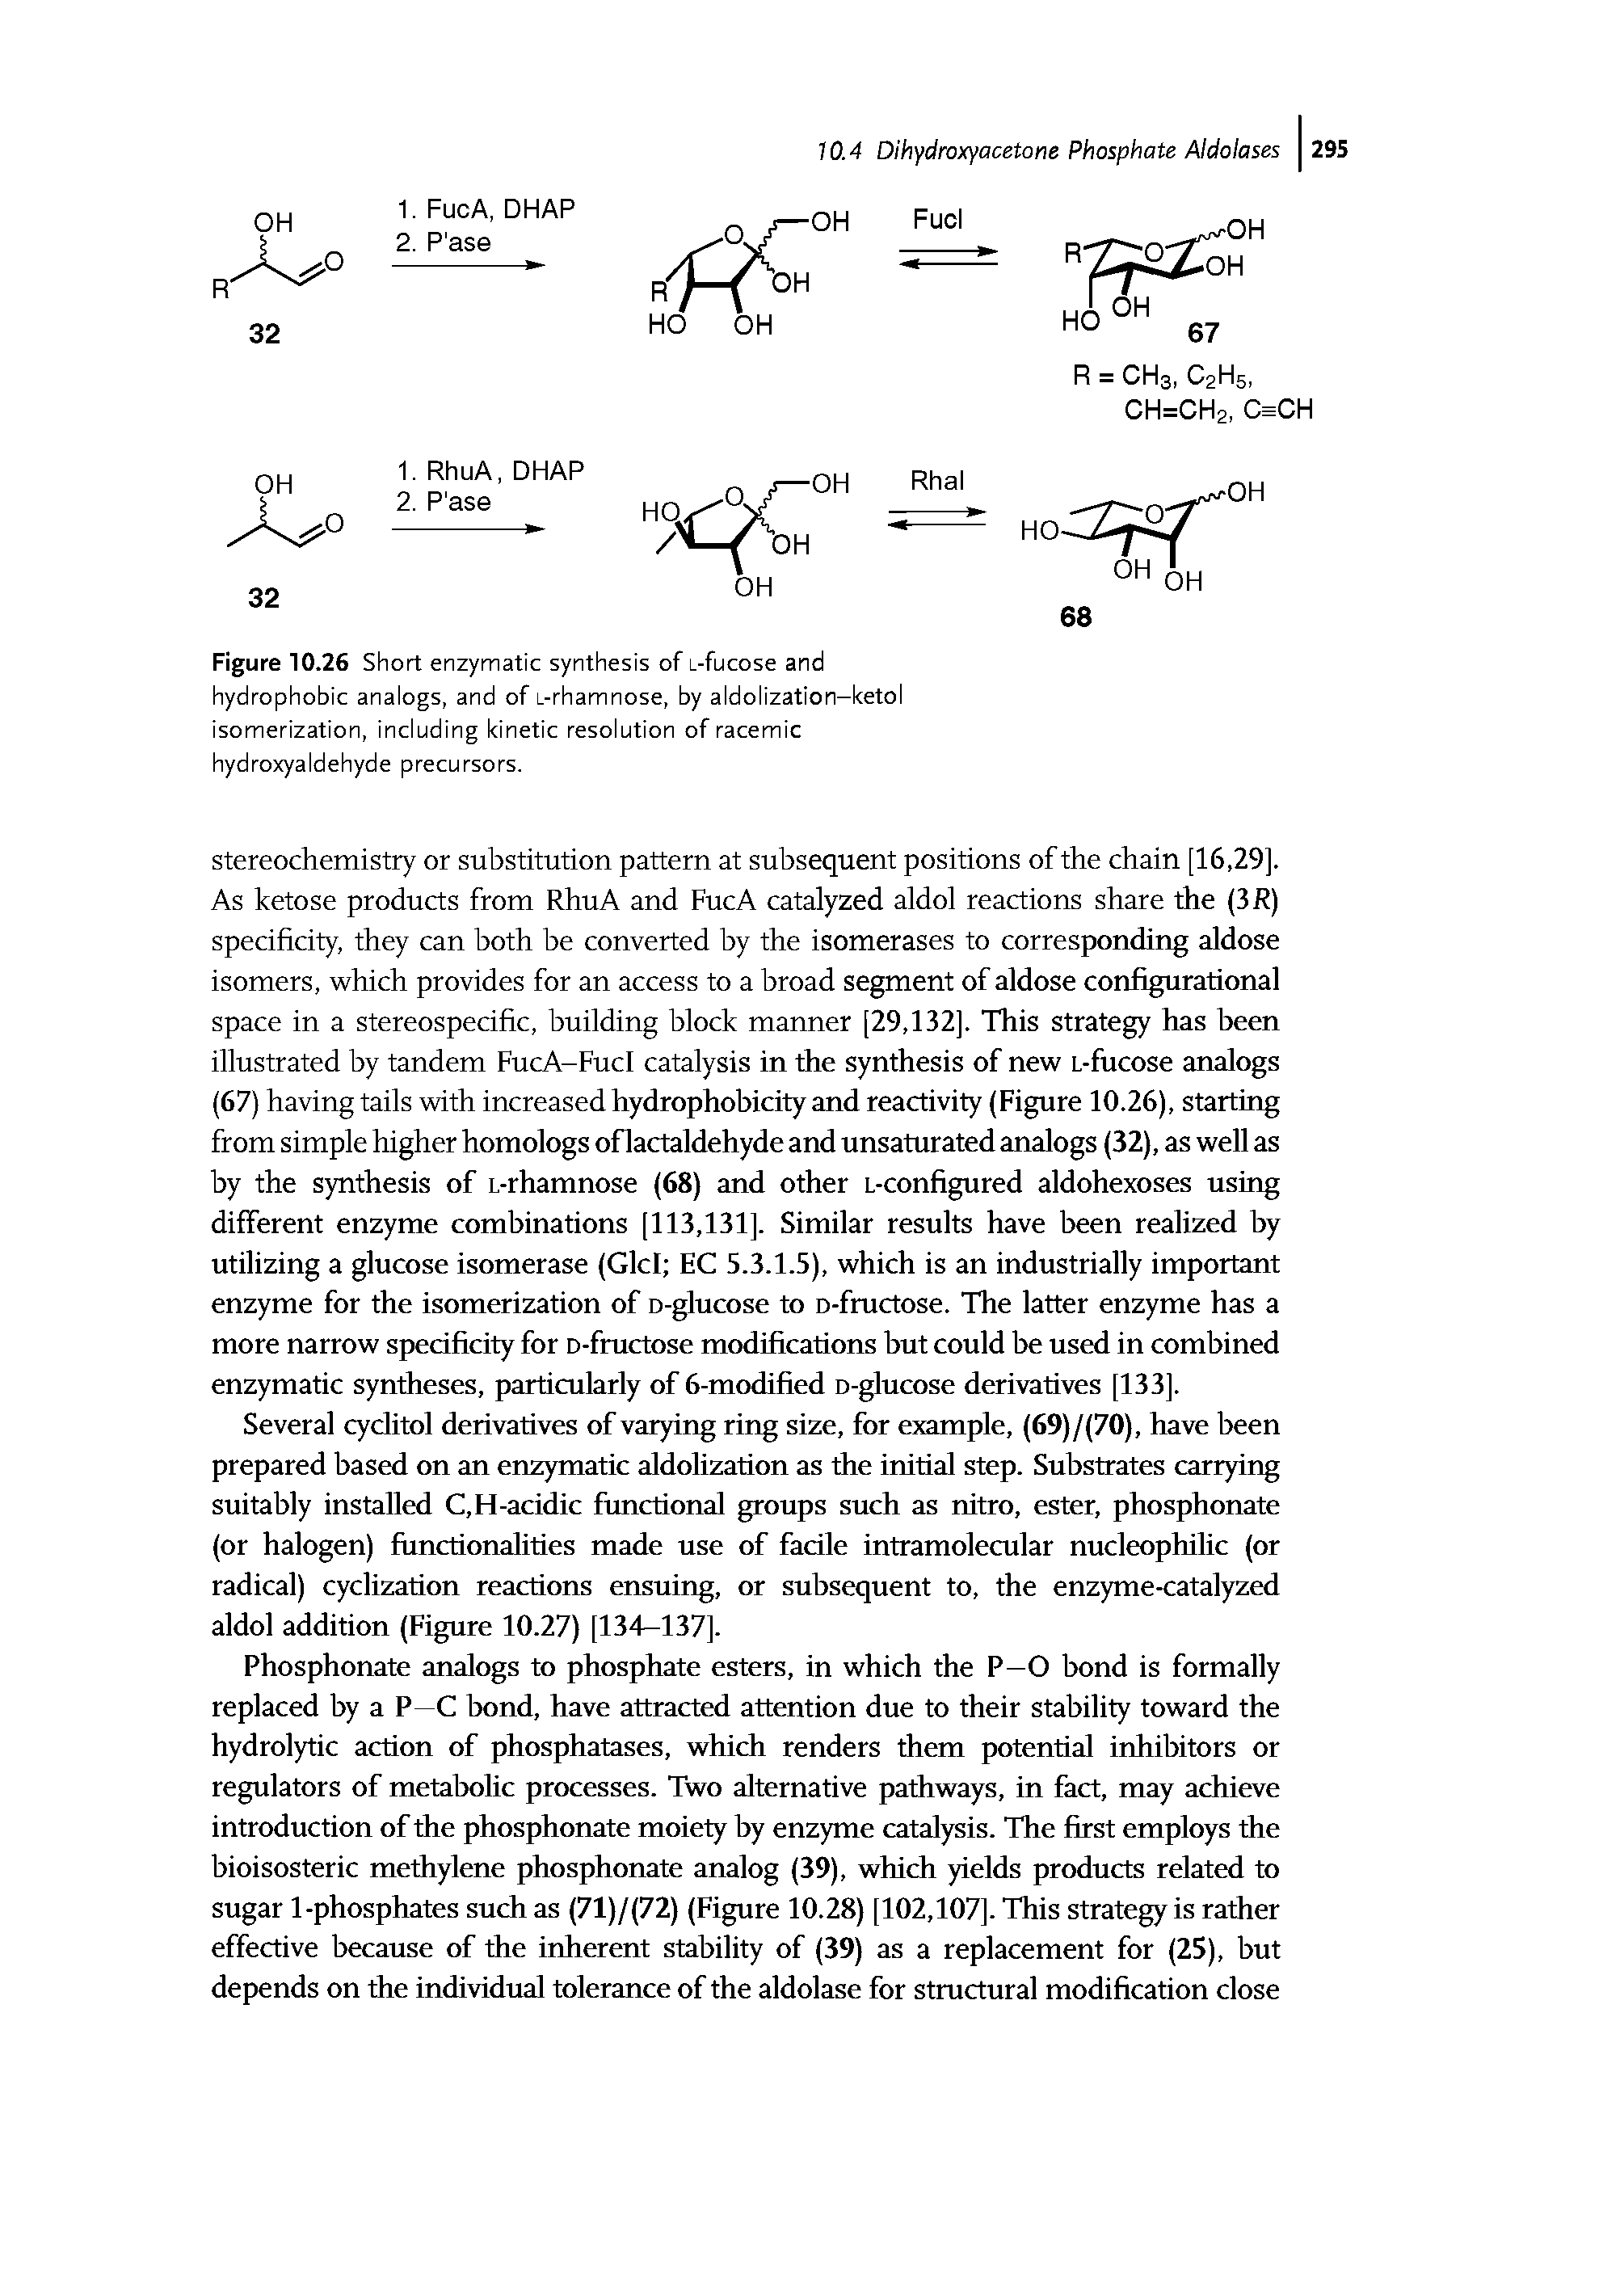 Figure 10.26 Short enzymatic synthesis of L-fucose and hydrophobic analogs, and of L-rhamnose, by aldolization-ketol isomerization, including kinetic resolution of racemic hydroxyaldehyde precursors.